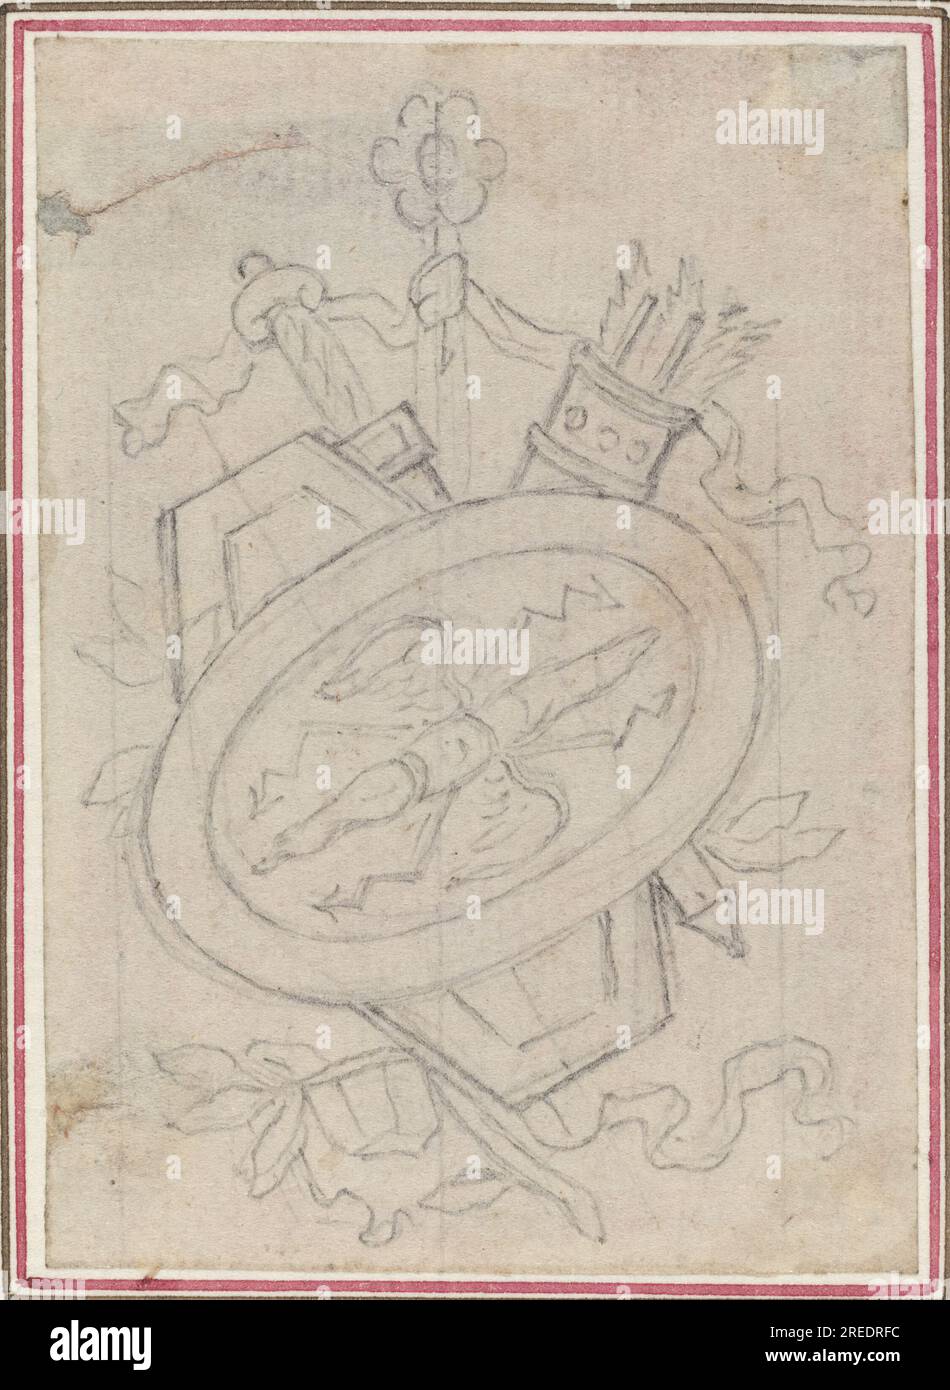 'Hubert François Gravelot, An Ornamental Trophy, 0, graphite, incised for transfer on laid paper; laid down, sheet: 7.4 x 5.3 cm (2 15/16 x 2 1/16 in.) support: 27.9 x 20 cm (11 x 7 7/8 in.), Gift of Arthur L. Liebman, 1992.87.17' Stock Photo